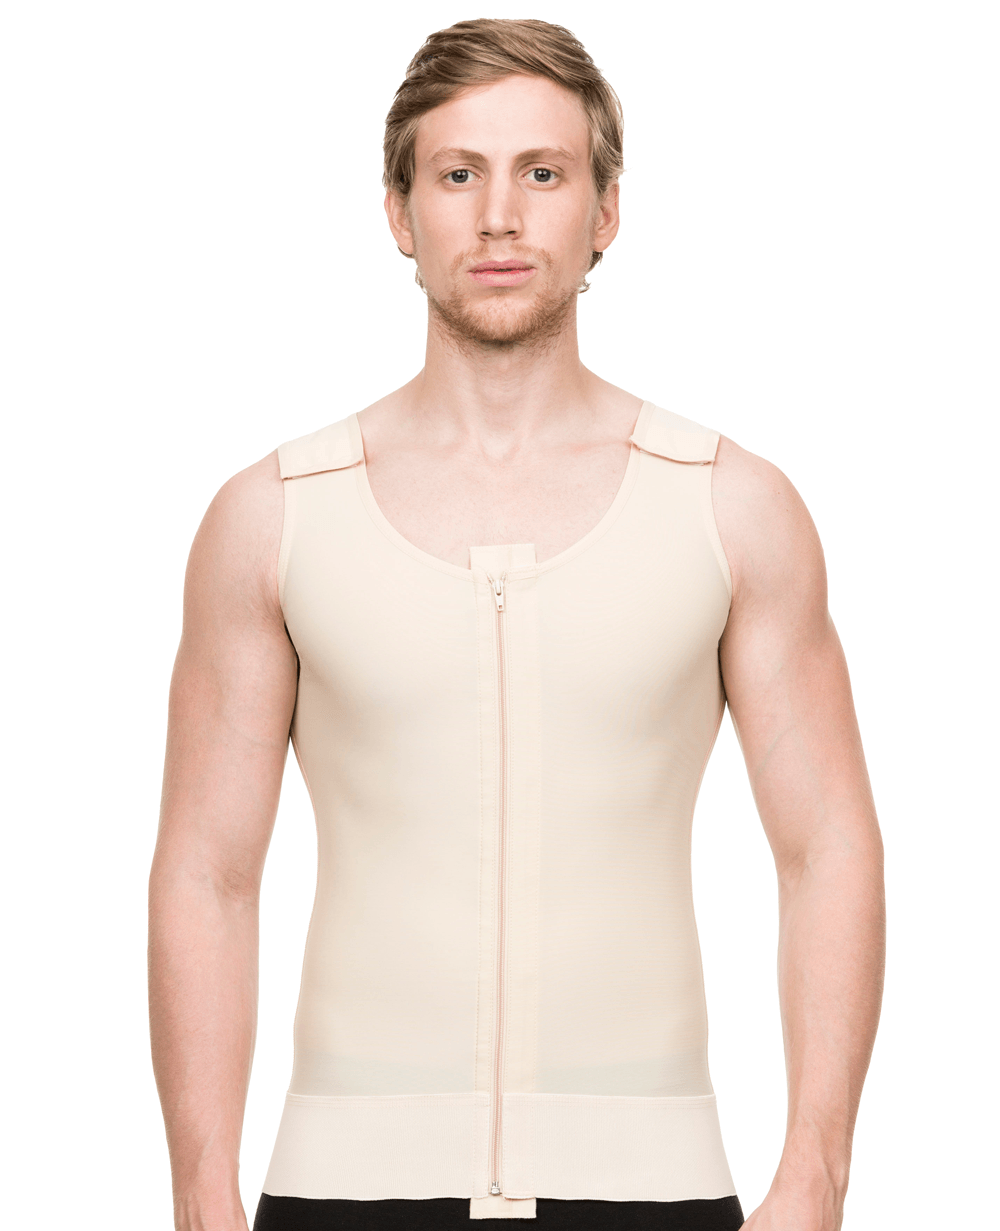 2nd Stage Body Suit Below Knee Length with Suspender Open Buttocks Enhancing  Compression Girdle (BE06-BK)